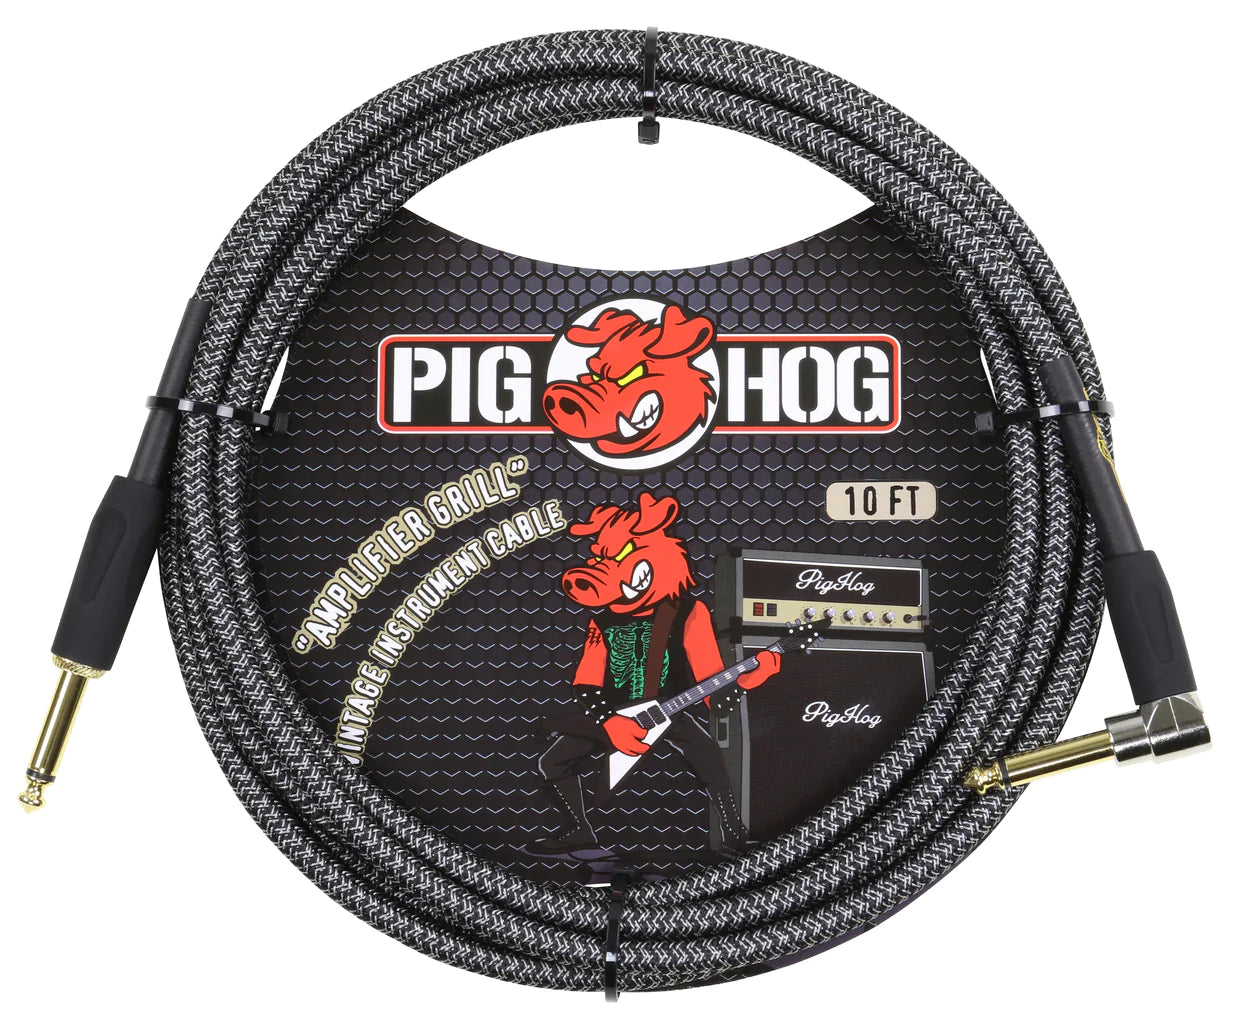 Pig Hog - "Amp Grill" Instrument Cable 10ft - Right Angle